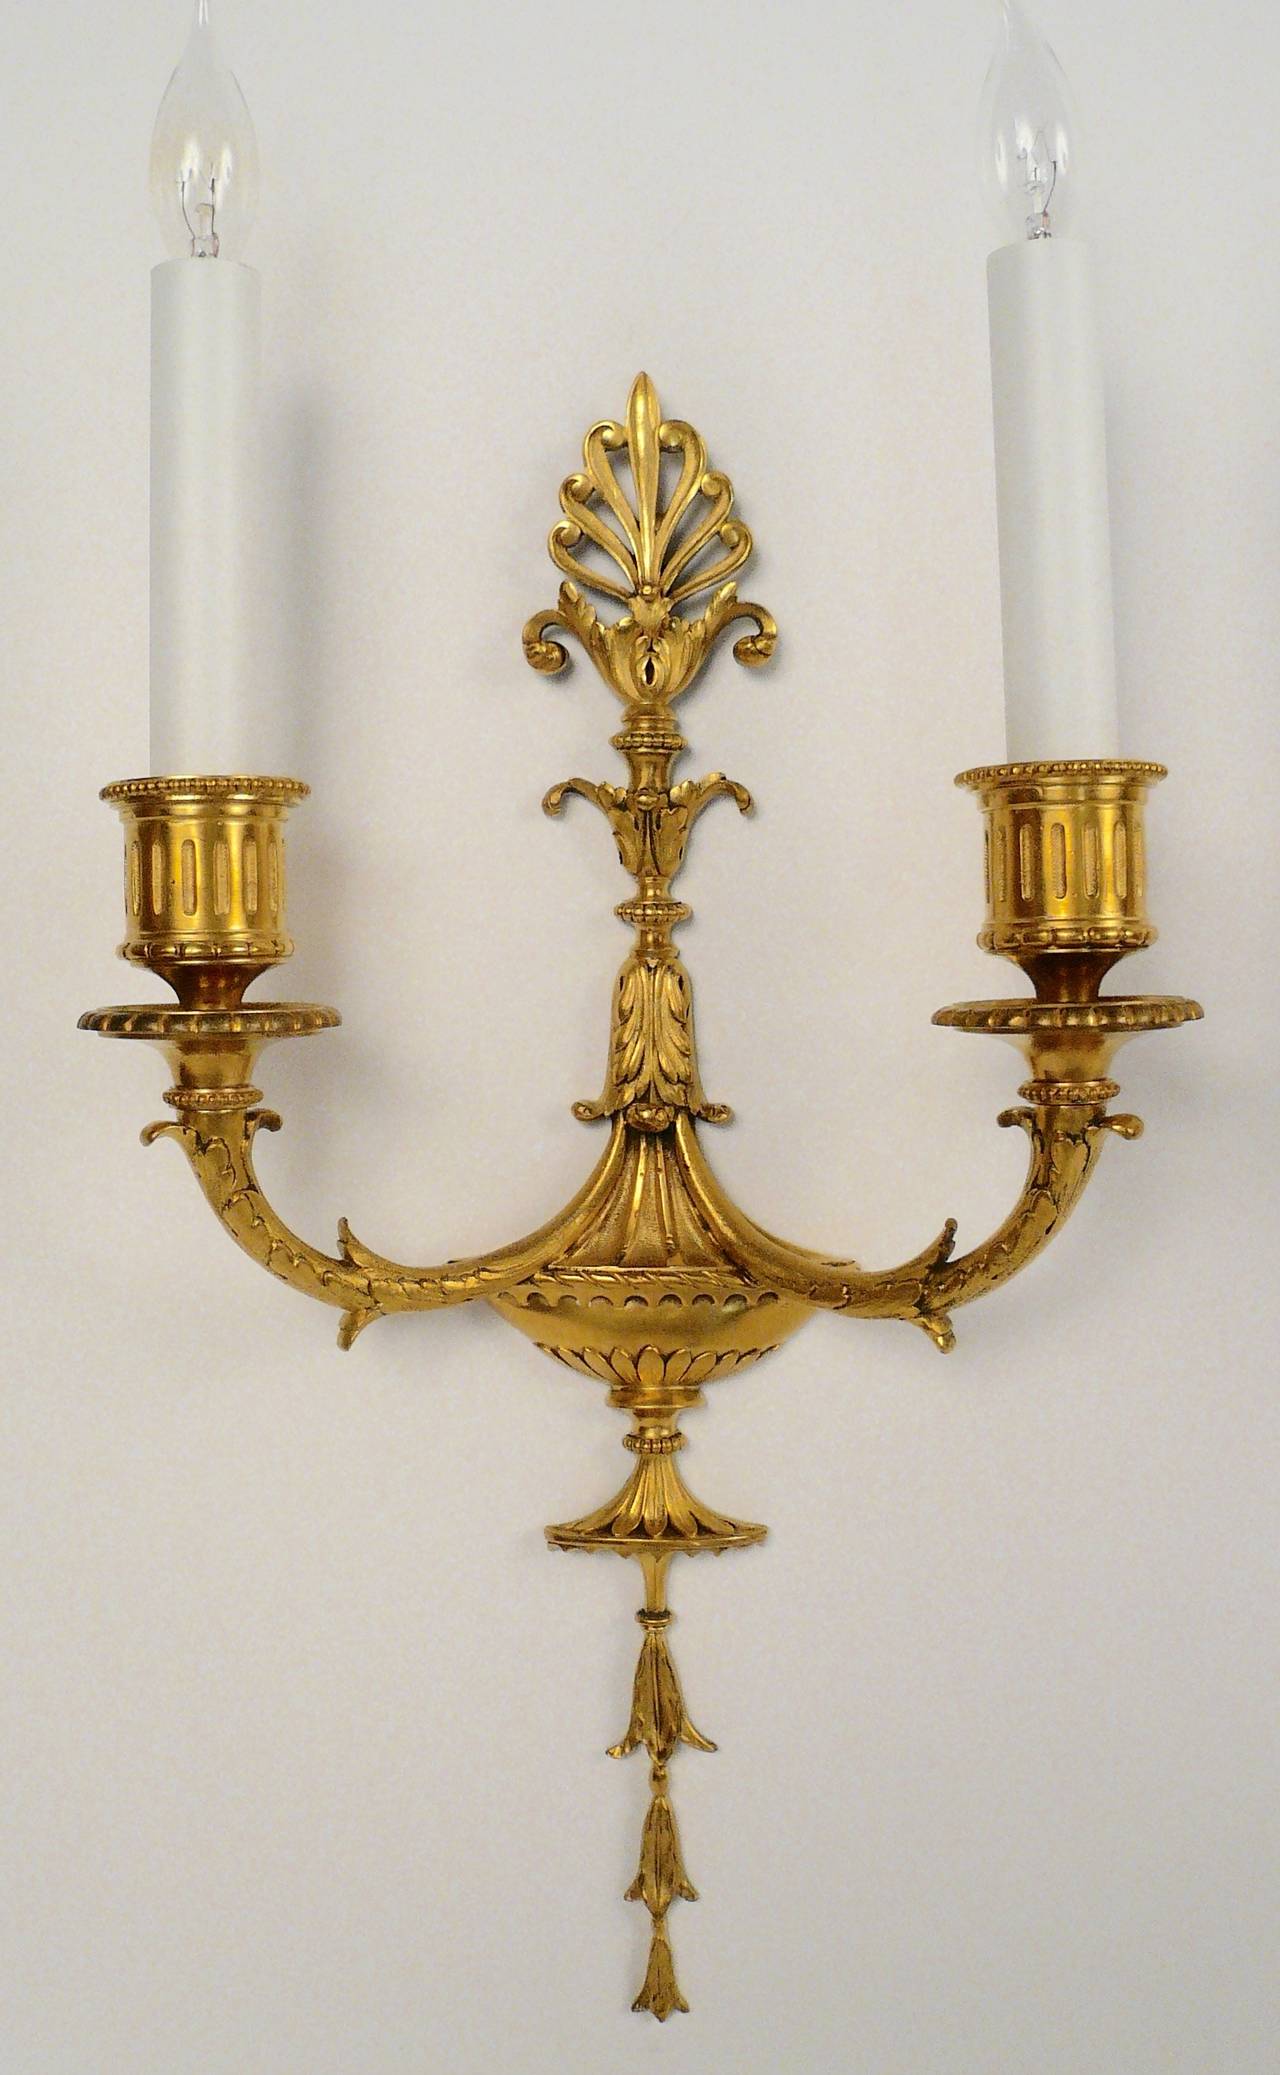 These urn form sconces with hanging bellflowers topped with anthemion, have their original gilt finish.